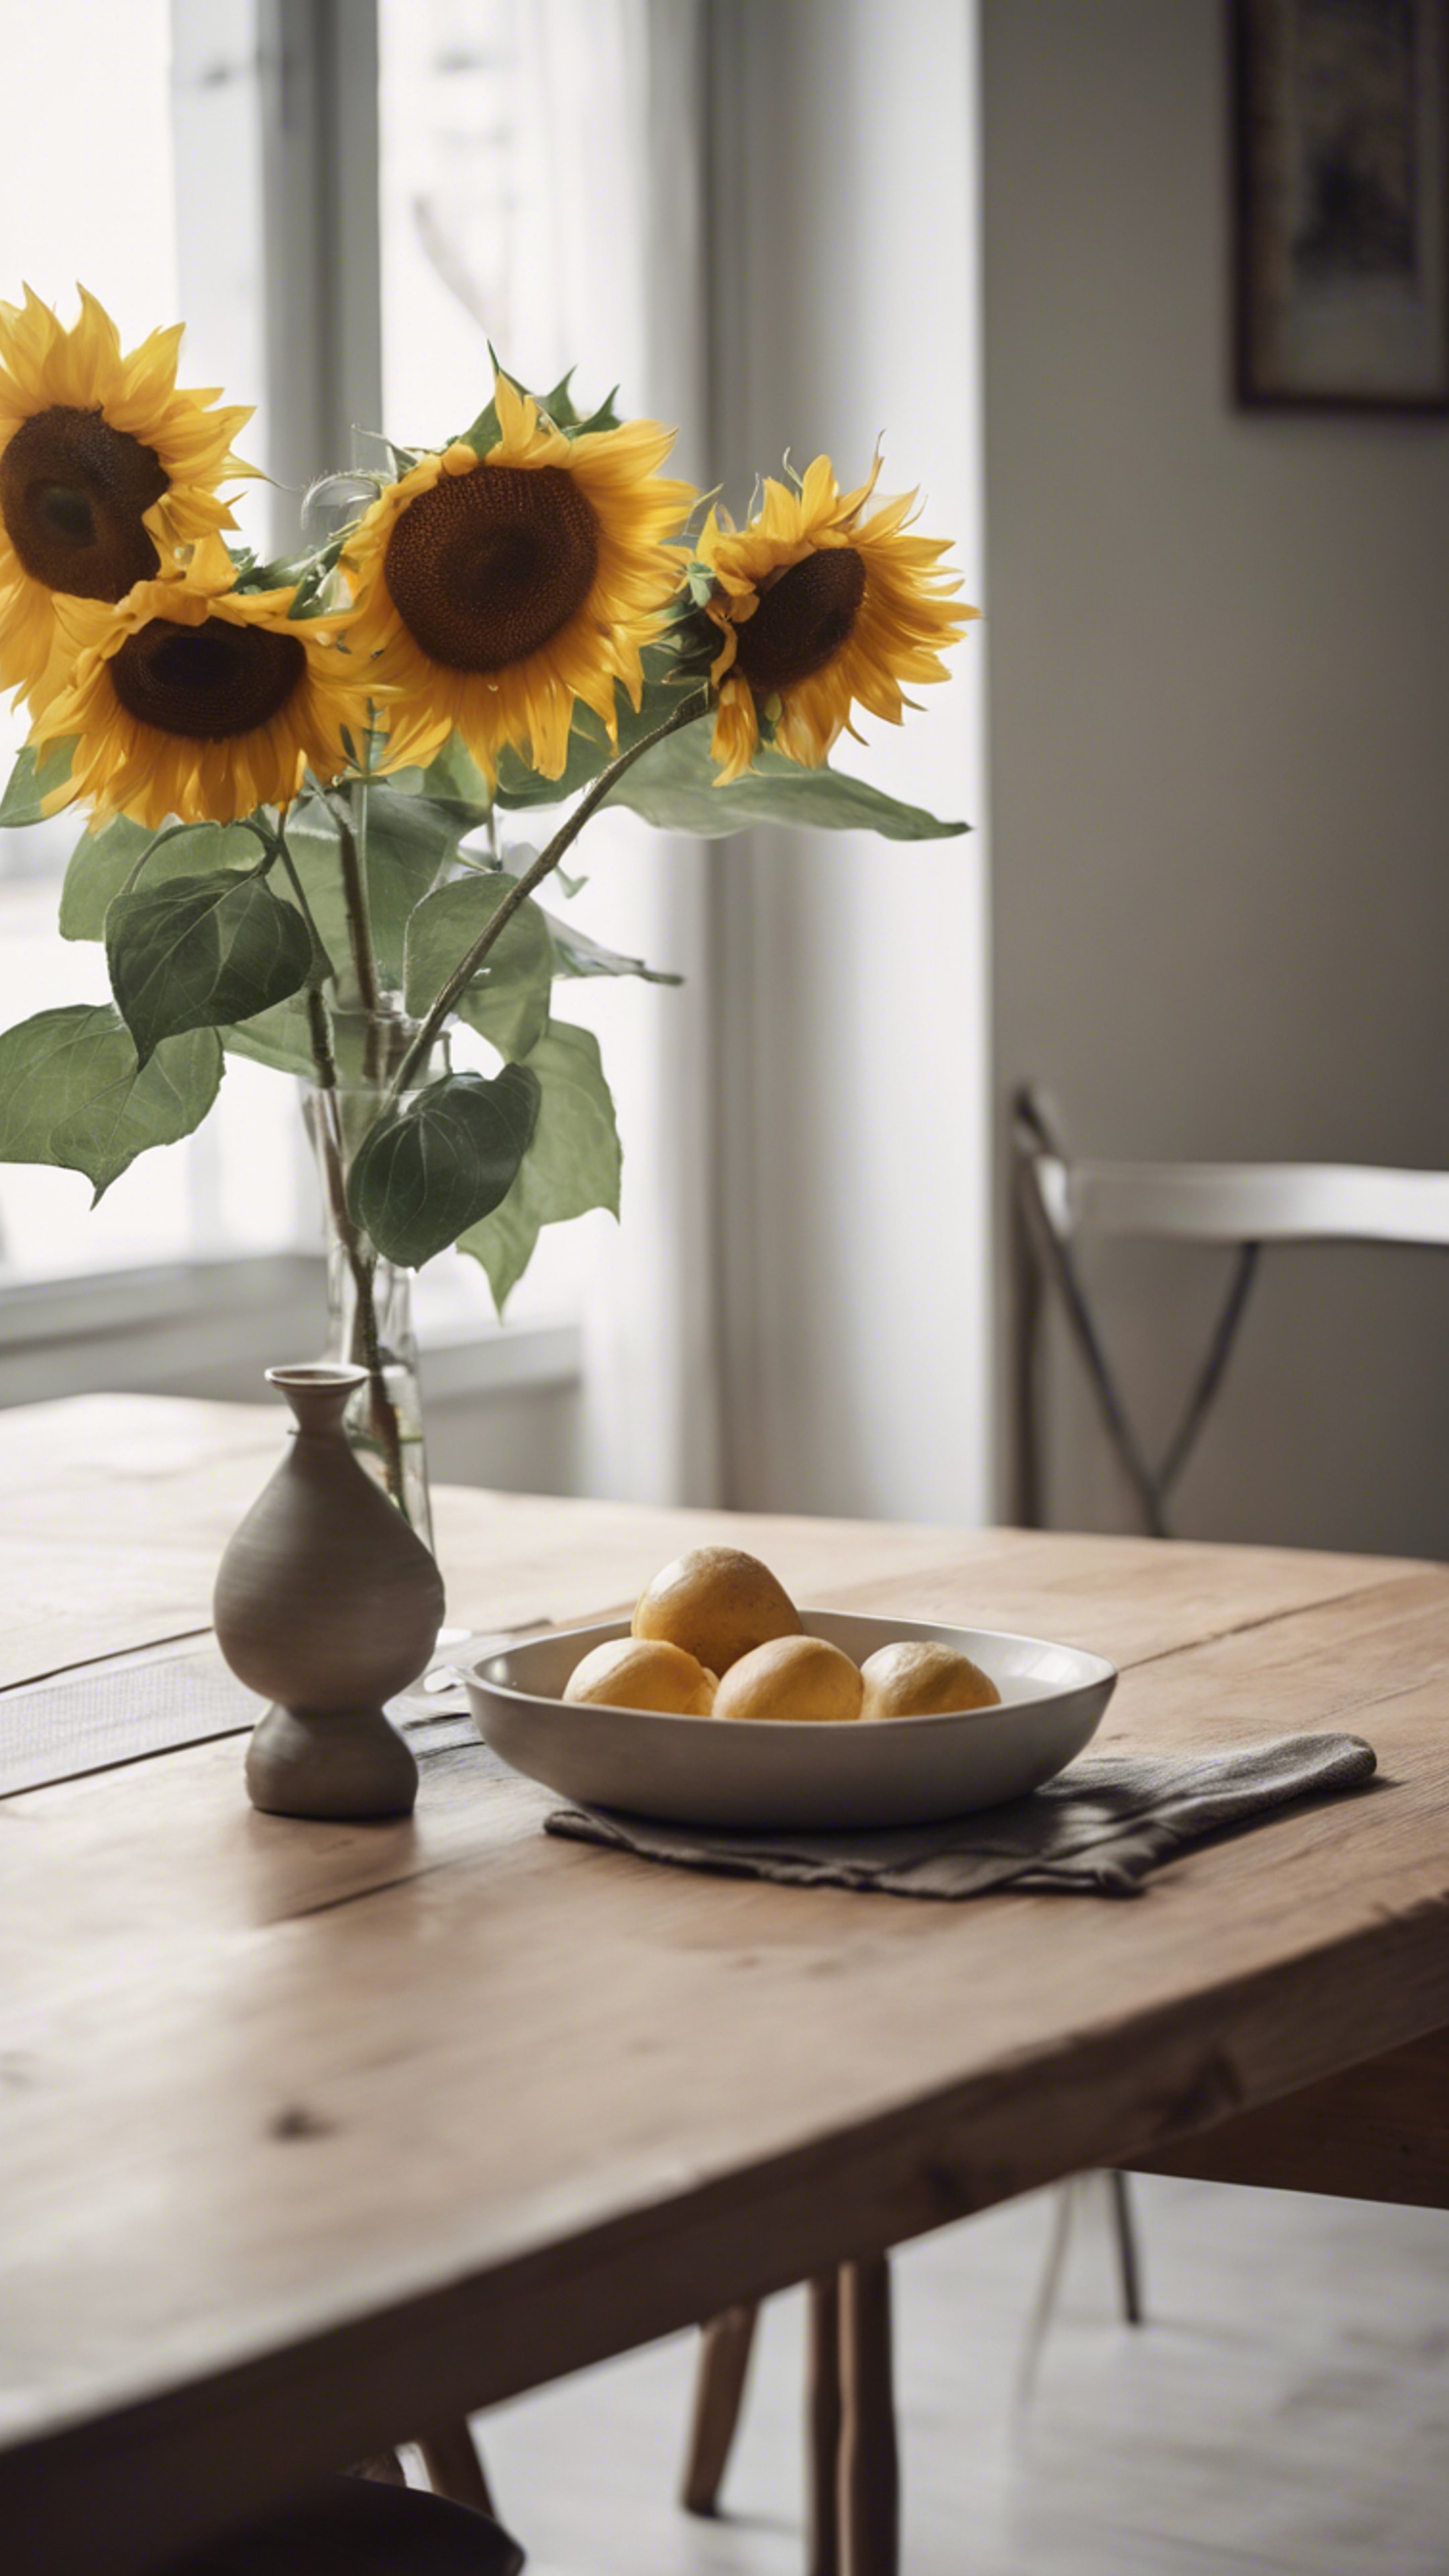 A minimalist dining area with a wooden table, set with simple china and a vase of sunflowers. Sfondo[7db5290c1b5a4d25ba08]